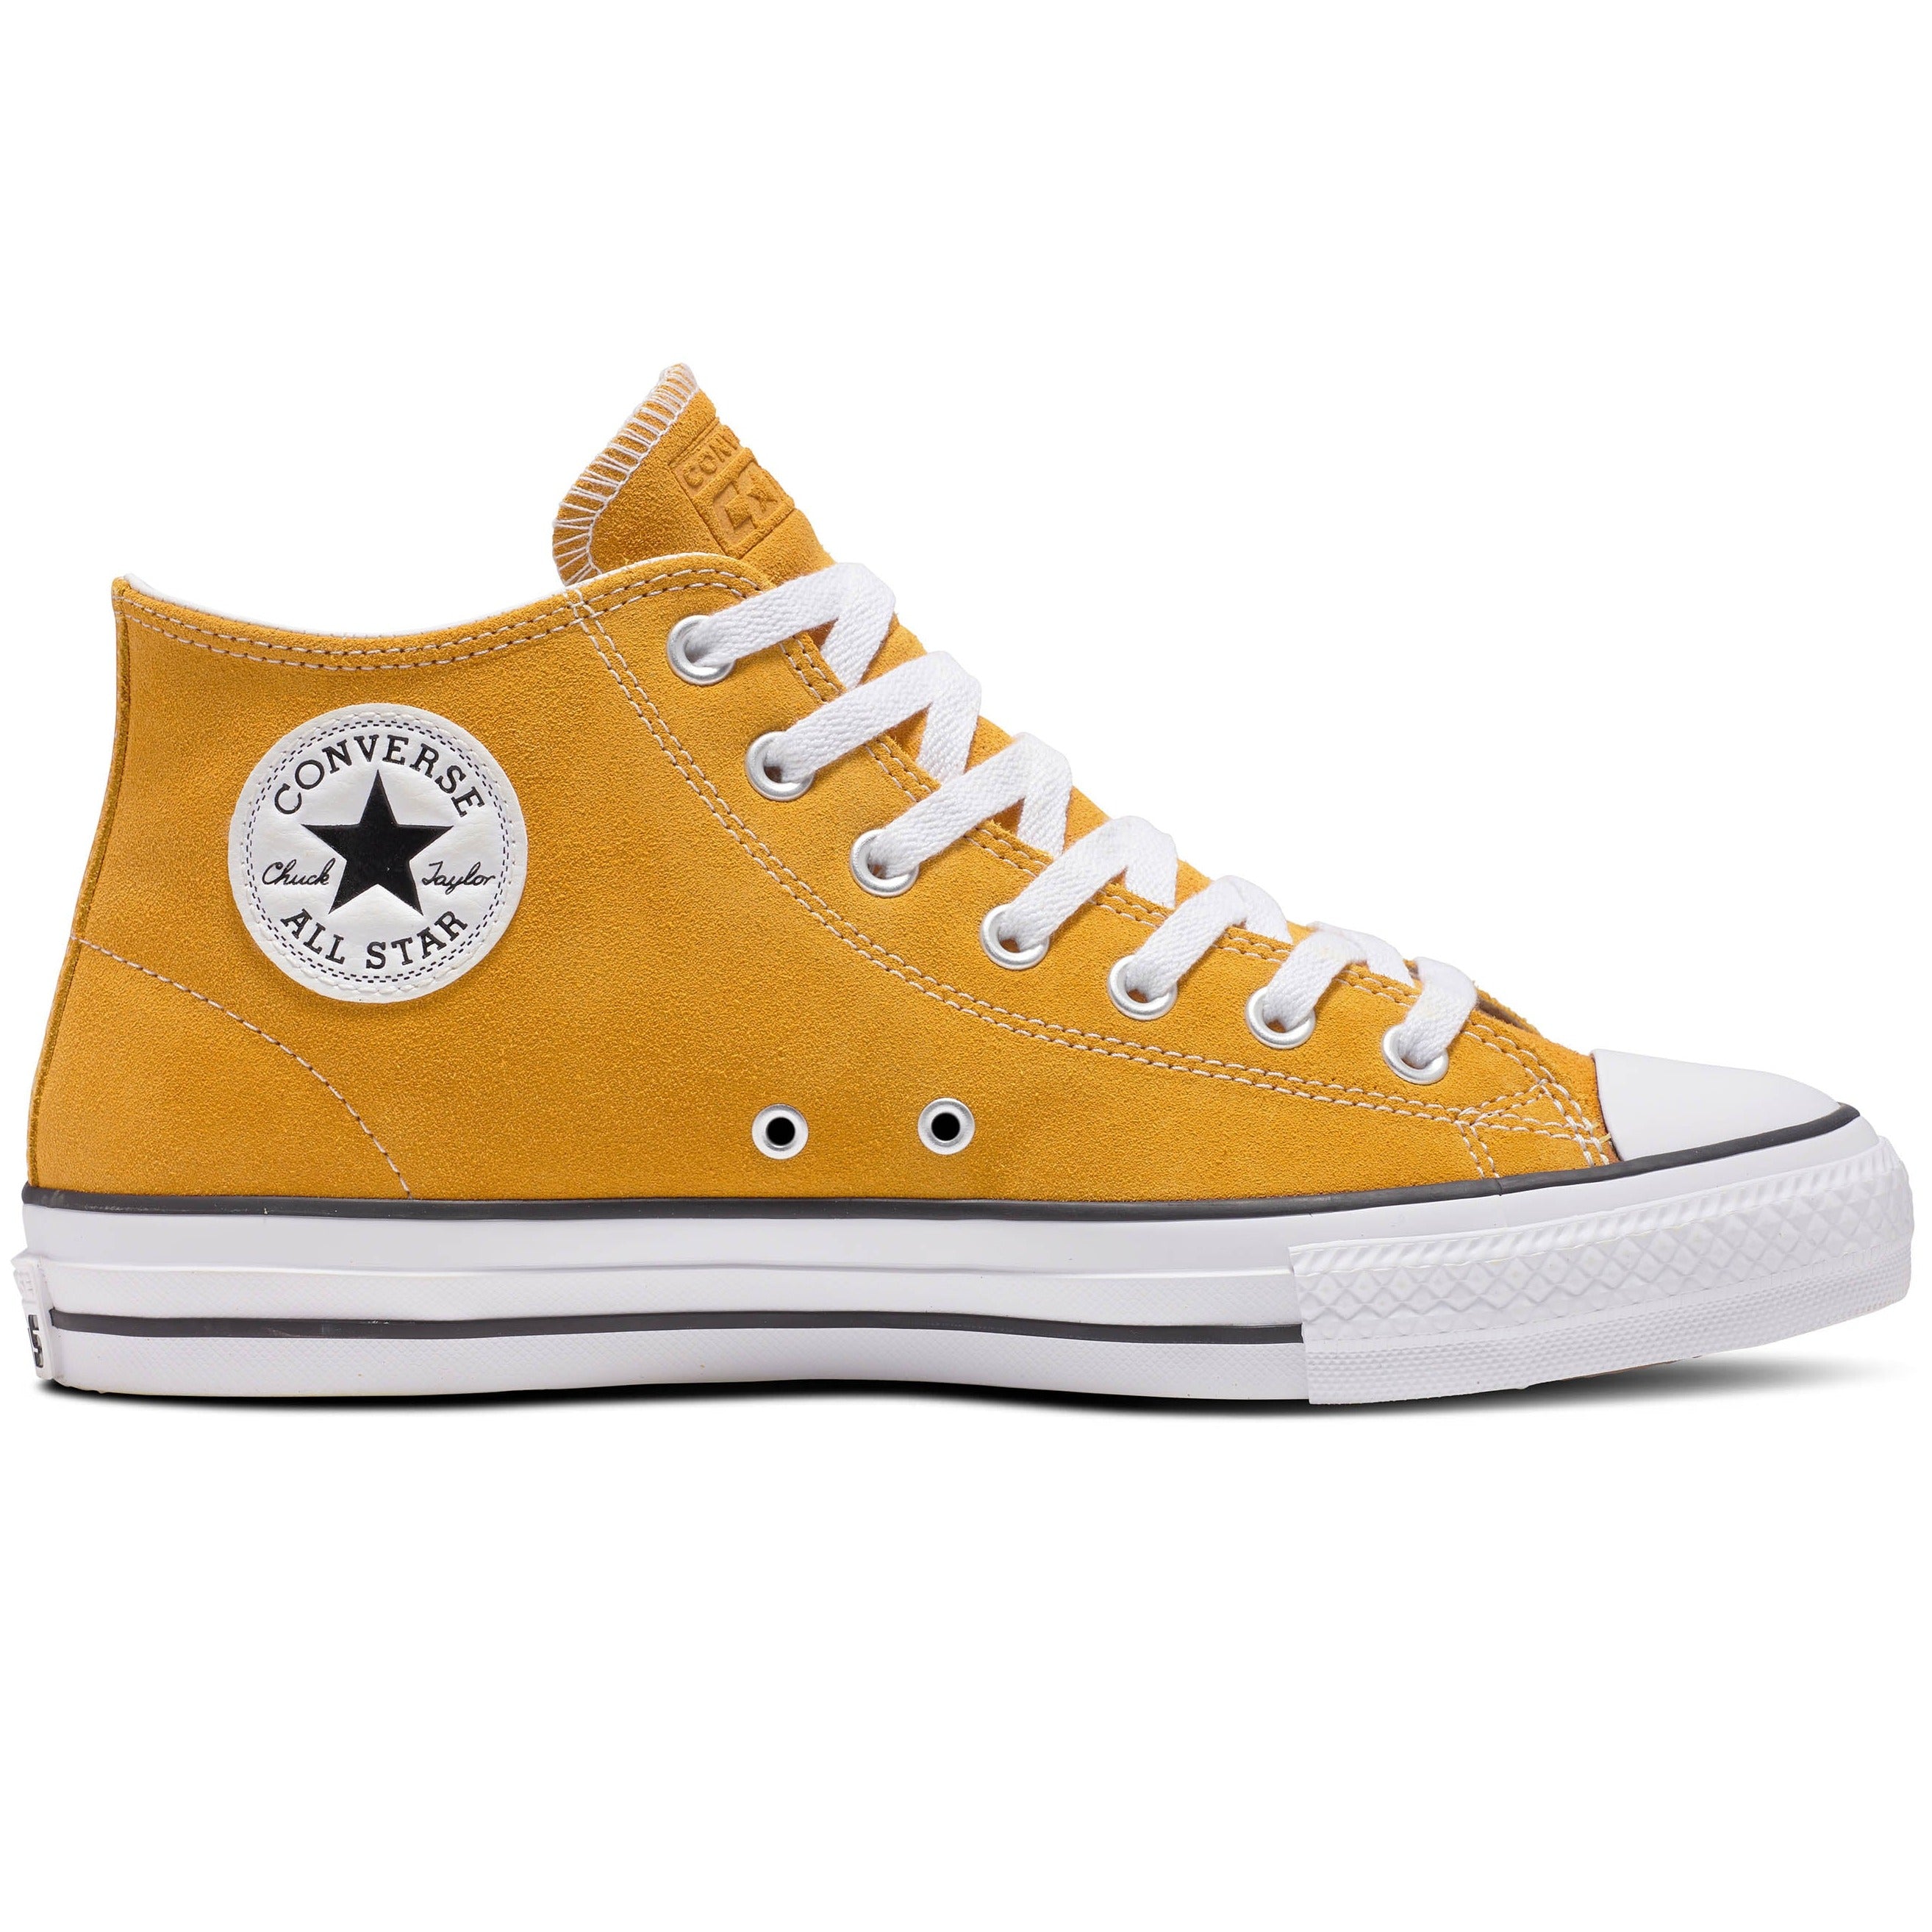 Isse Paine Gillic Sult Converse CONS CTAS Pro Mid Sunflower Gold/White/Black - Orchard Skateshop